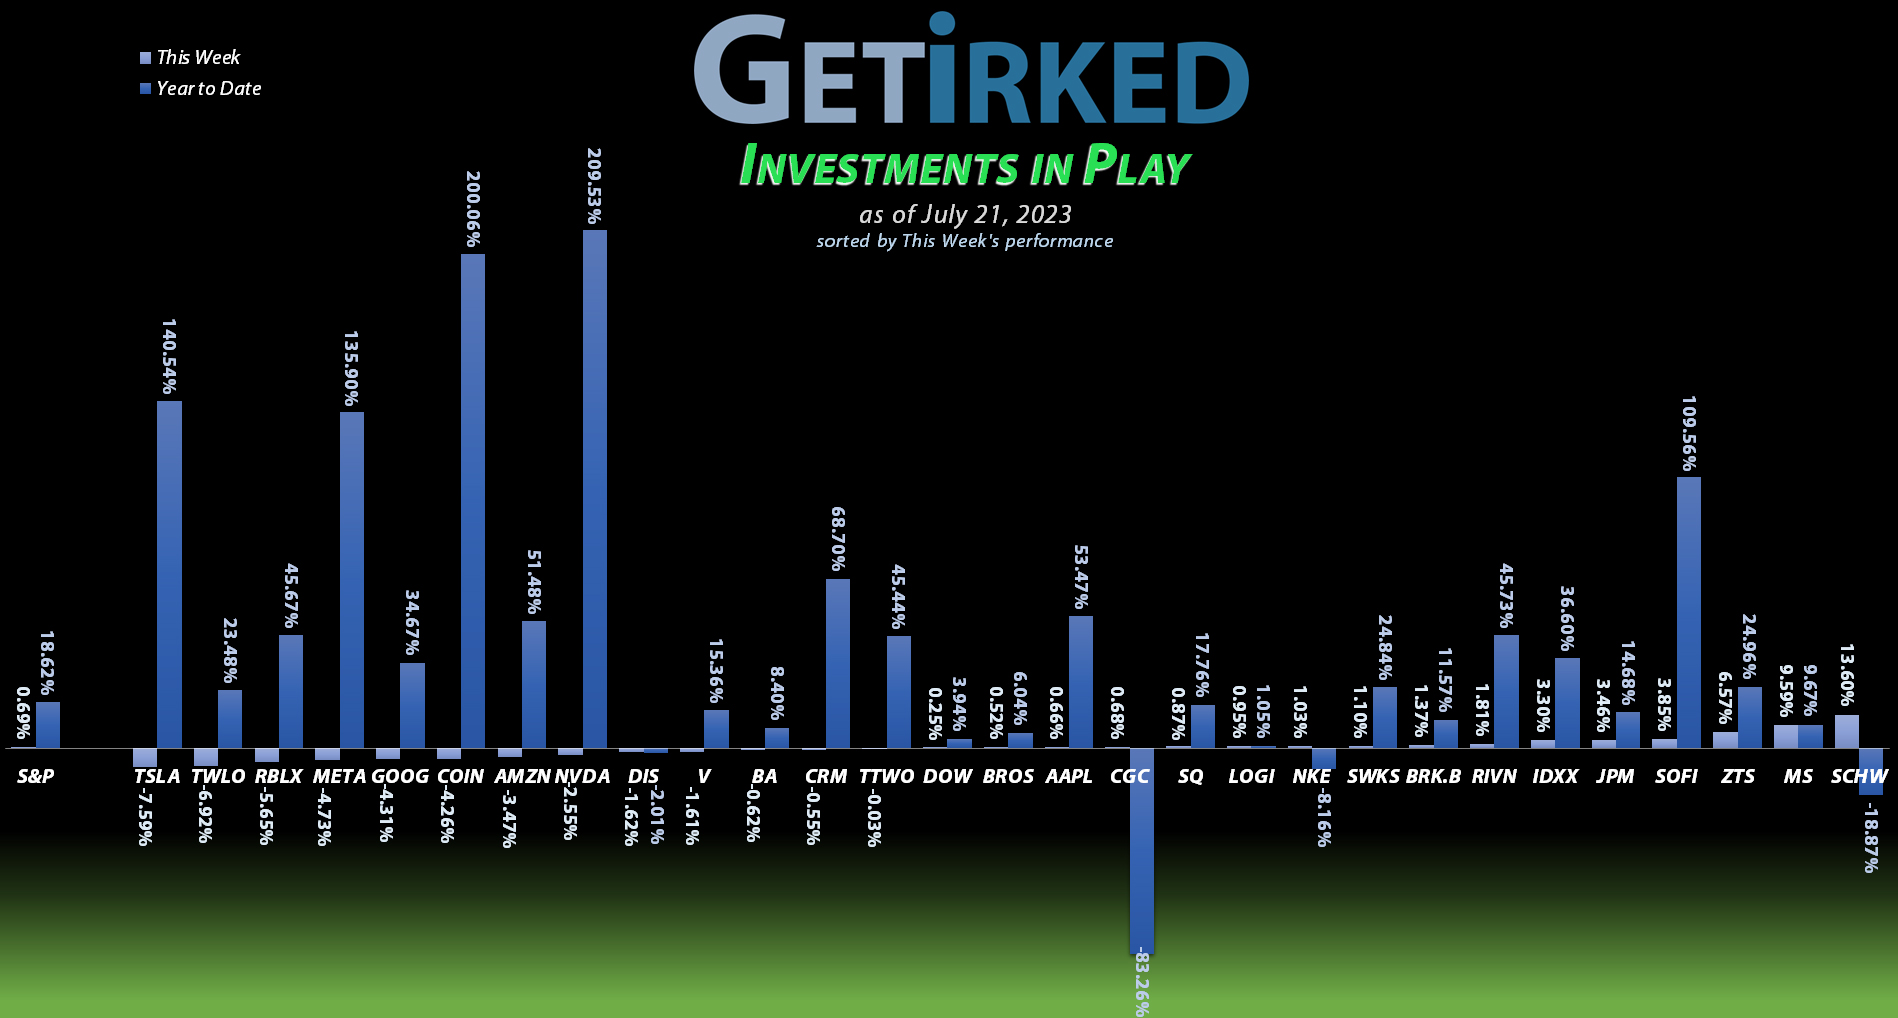 Get Irked's Investments in Play - July 21, 2023